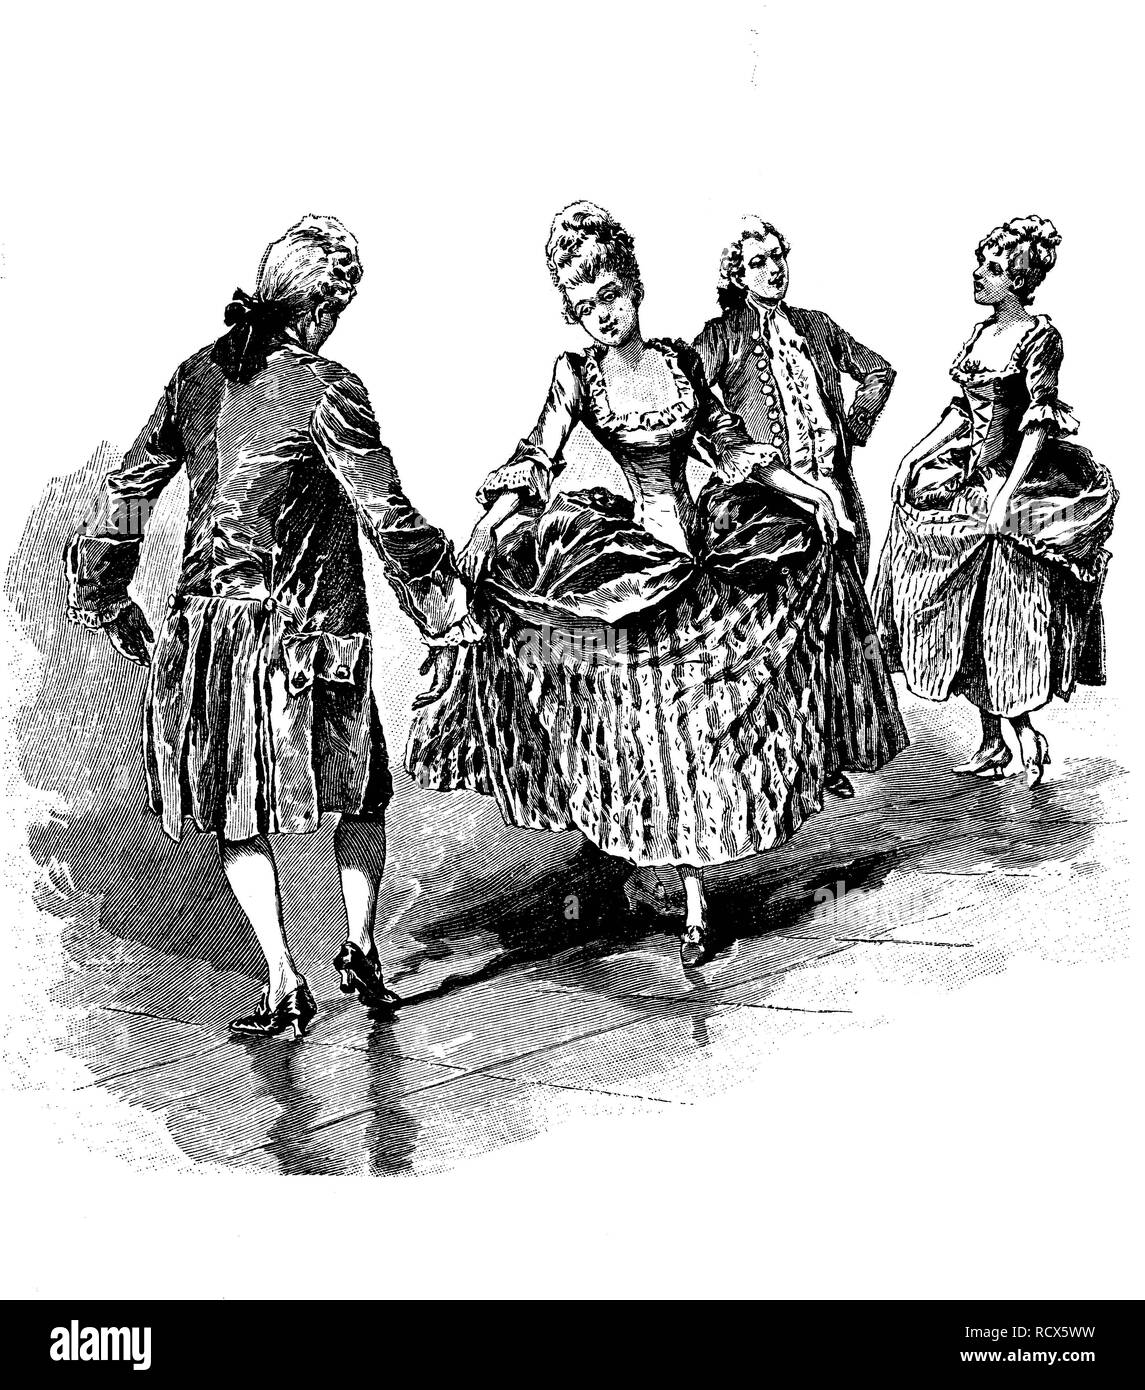 Minuet, old French folk dance of the Baroque and Classical eras, woodcut, 1888, historic engraving Stock Photo